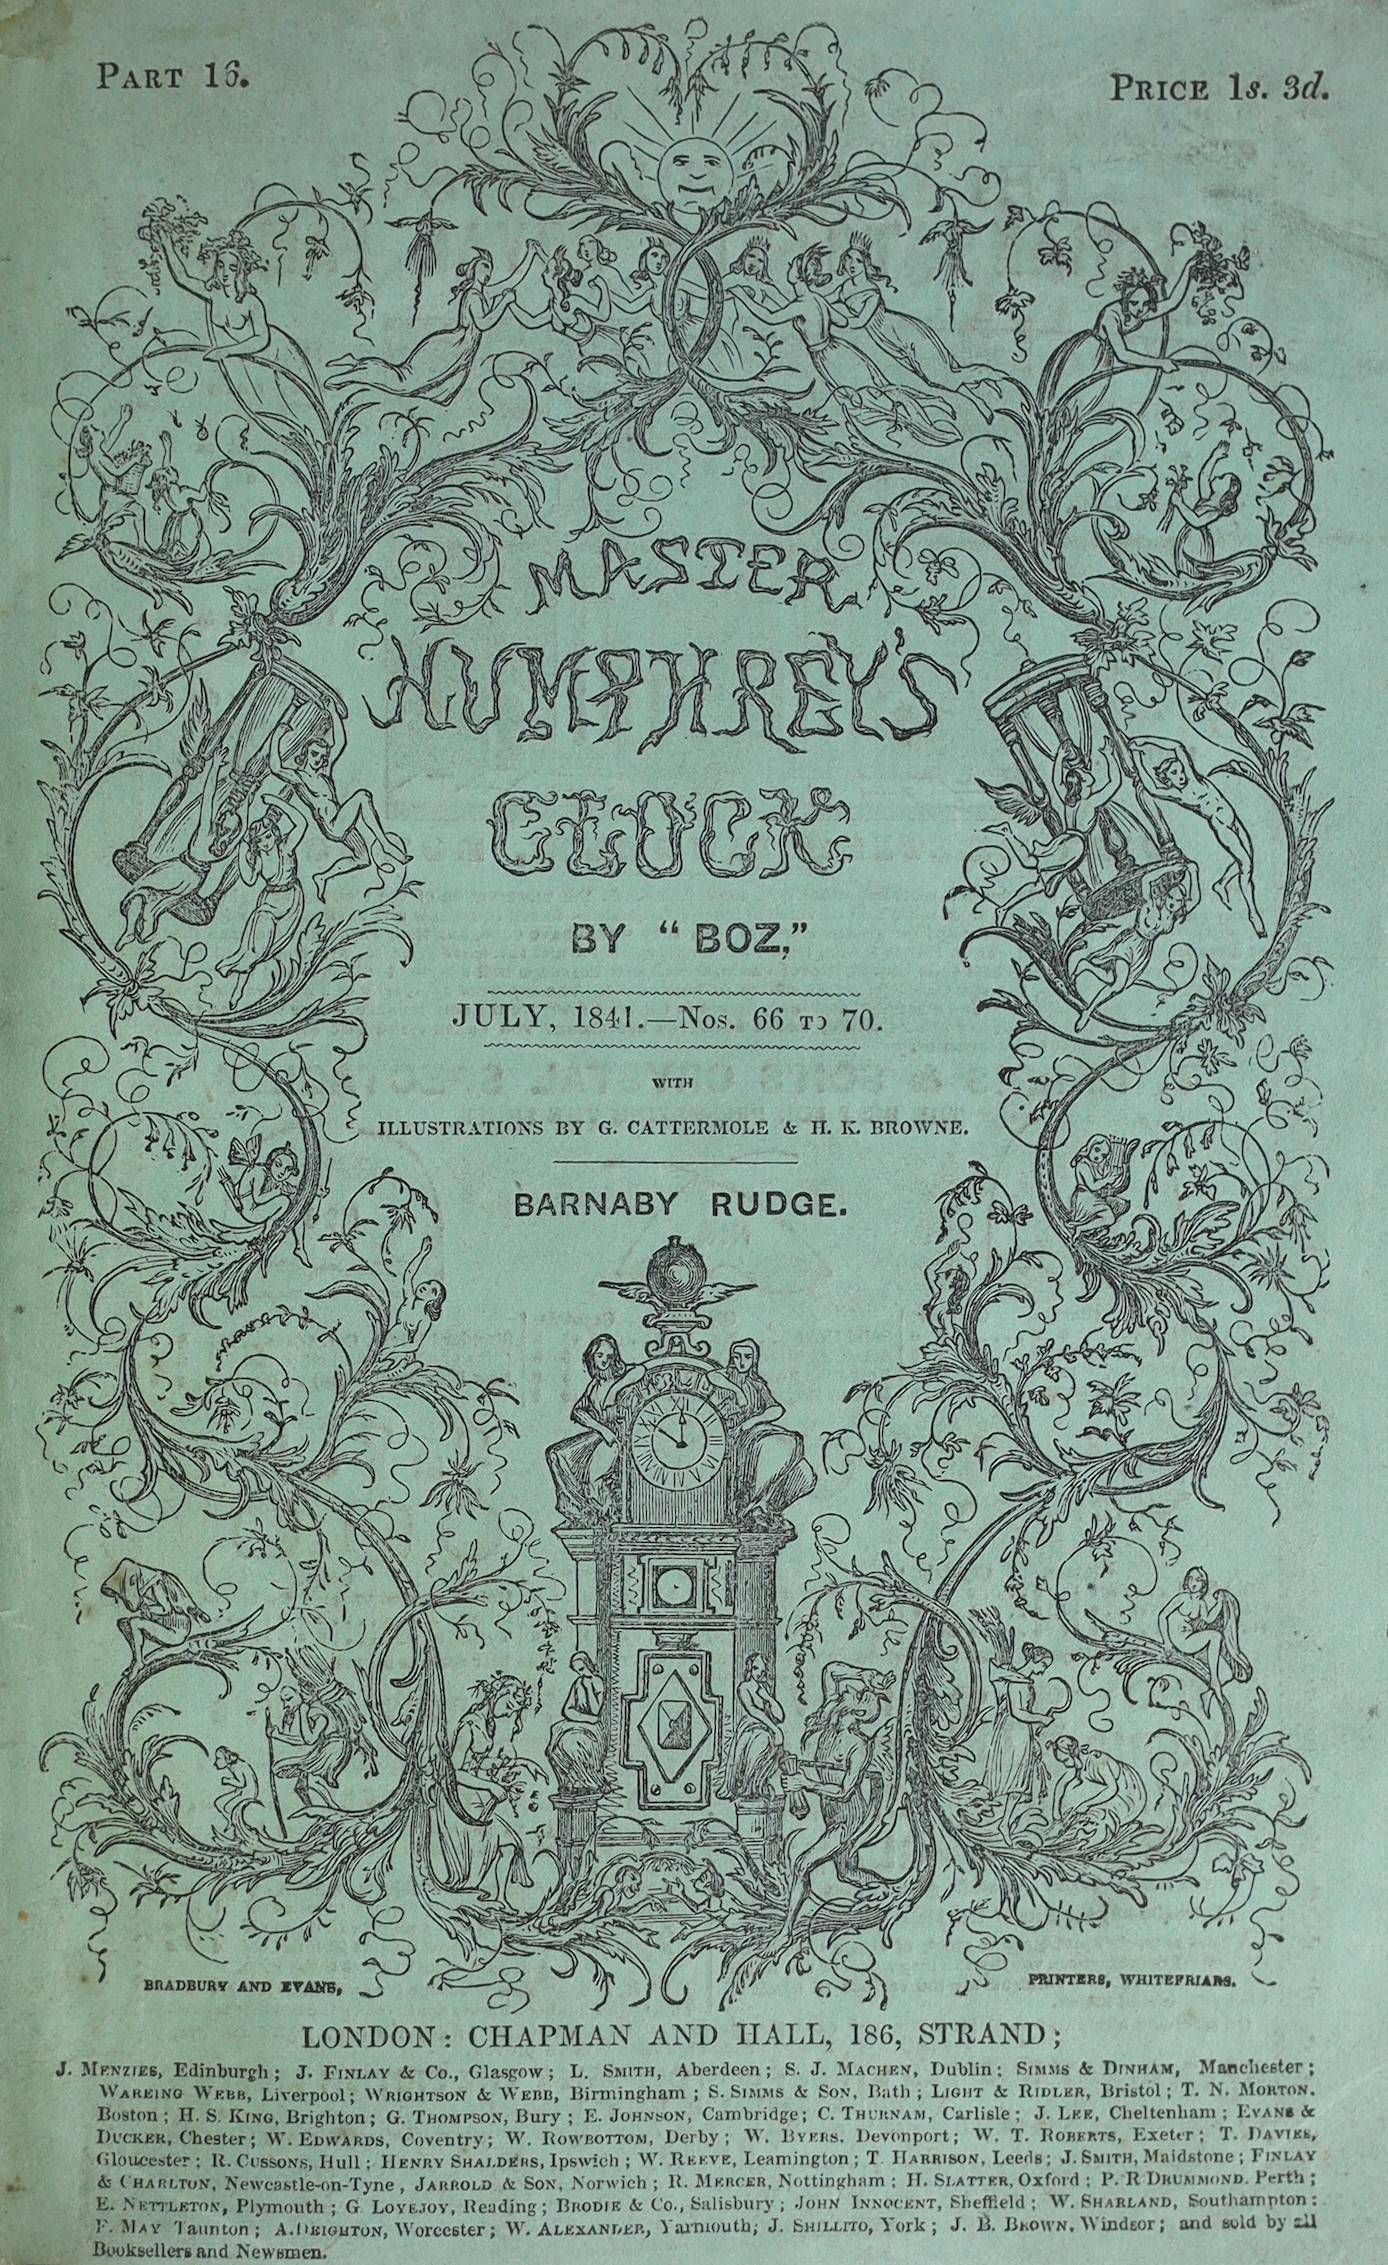 Dickens, Charles - Master Humphrey’s Clock, 1st edition in book form, 3 vols, 8vo, later quarter calf with marbled boards, renewed end papers, illustrated by George Cattermole and Halbot K. Browne (‘’Phiz’’), front page